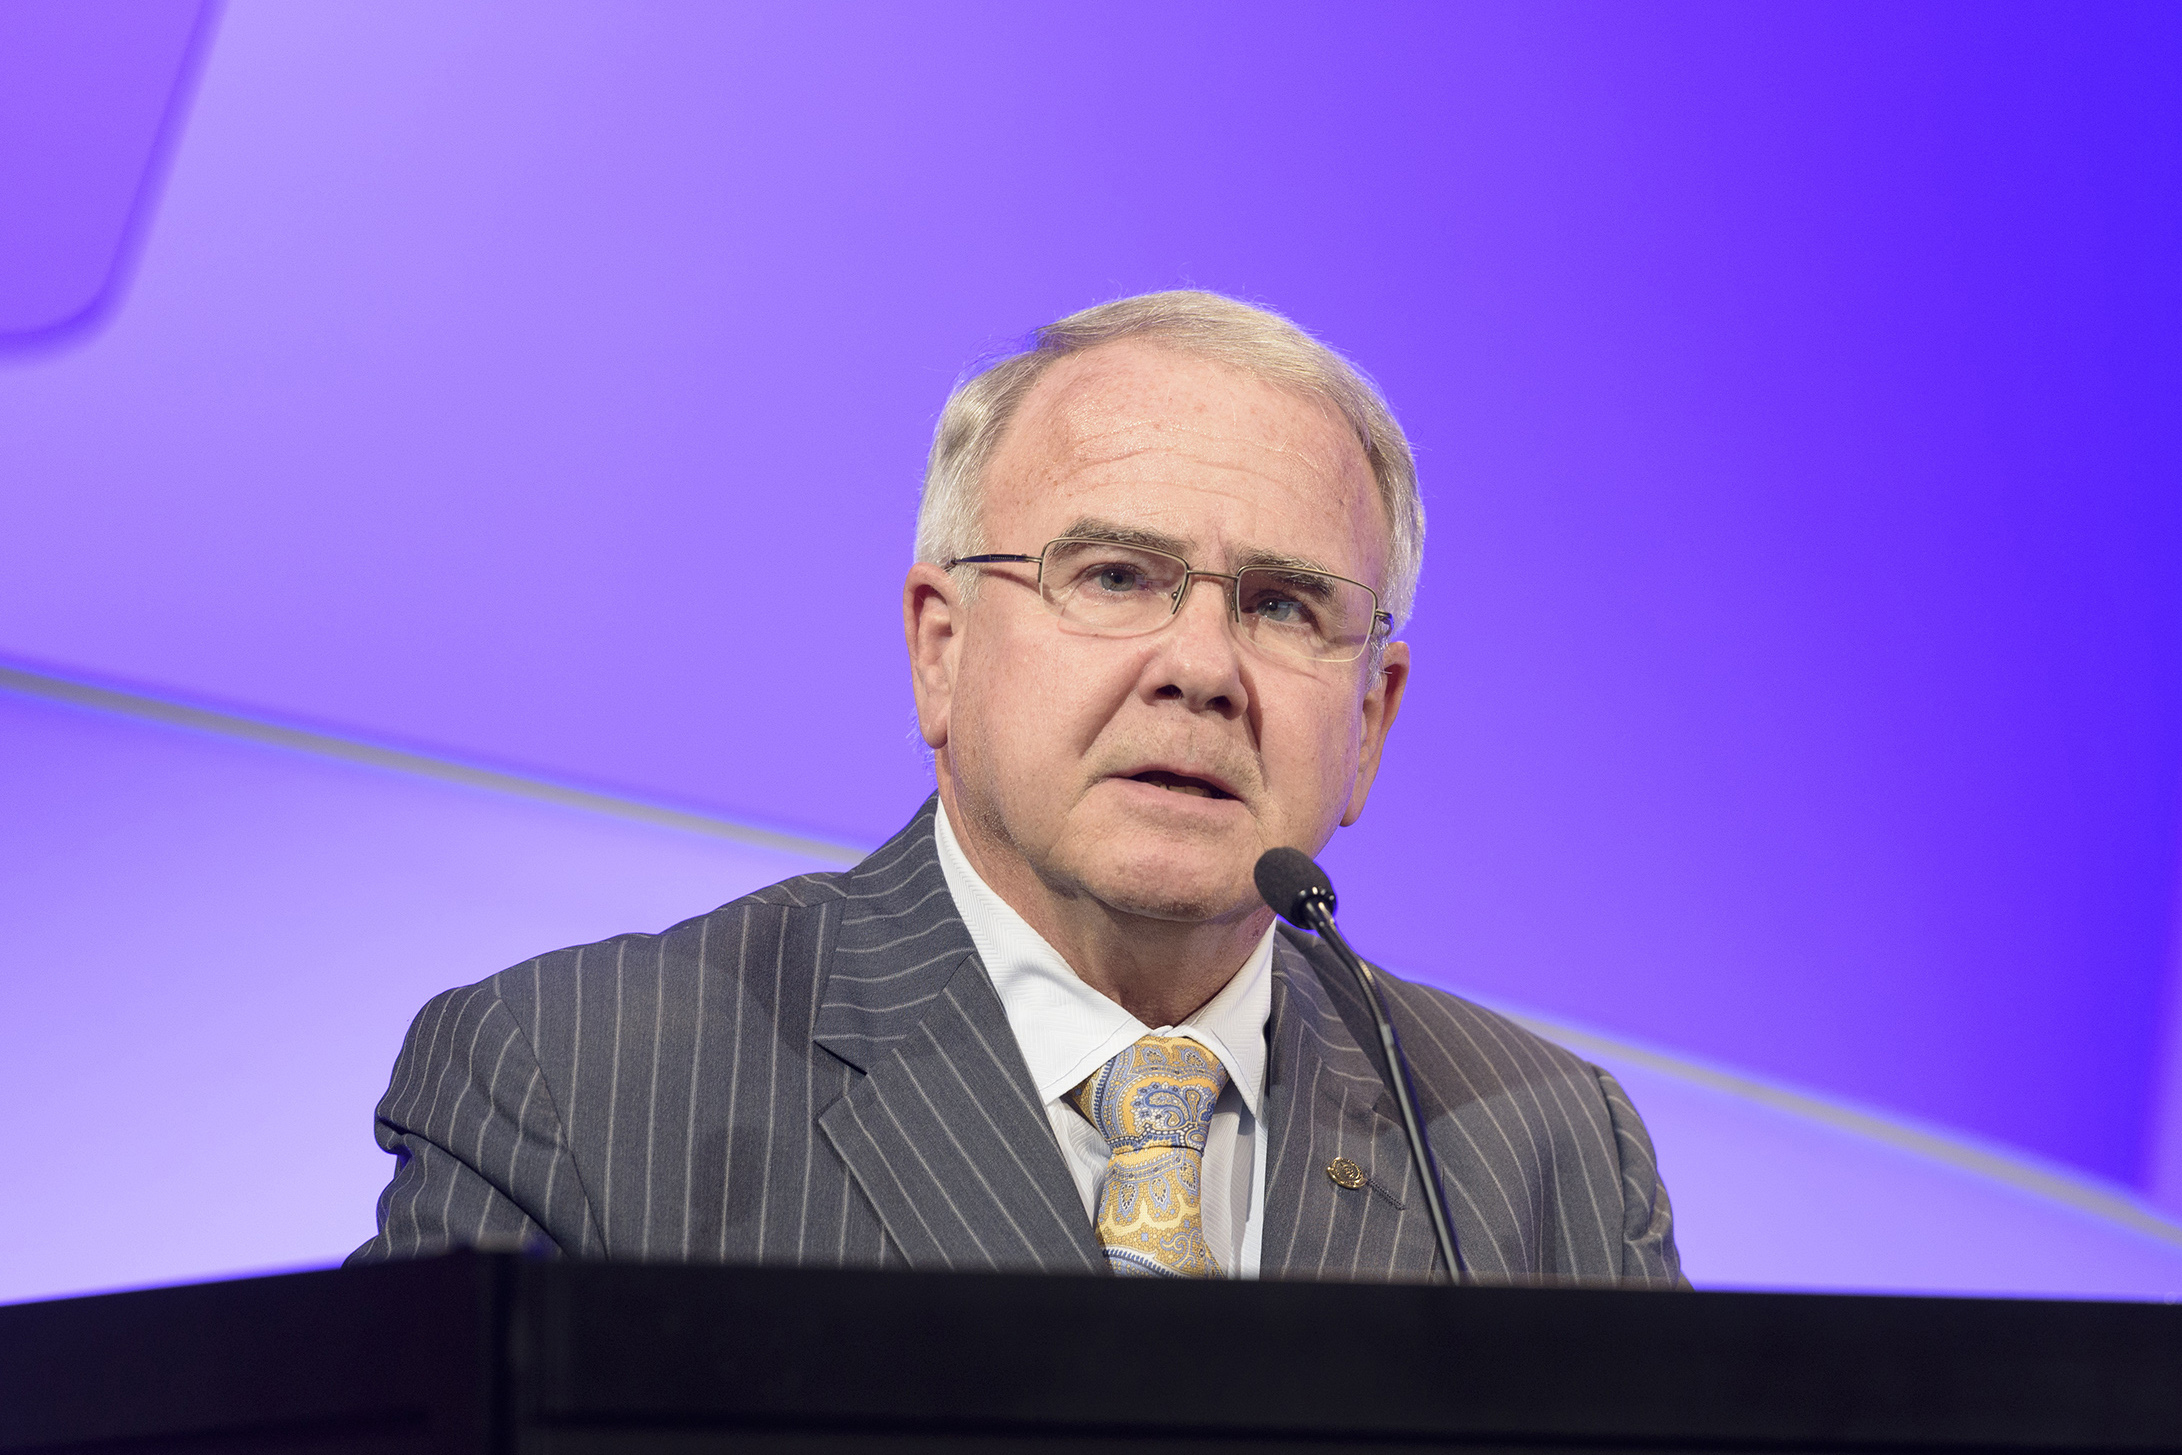 This November 2018 photo provided by the American Medical Association shows Gerald Harmon at the Interim Meeting of the AMA in National Harbor, Md. The nation’s largest, most influential doctors’ group is holding its annual policymaking meeting starting Friday, June 11, 2021, amid backlash over its most ambitious plan ever — to help dismantle centuries-old racism and bias in all realms of the medical establishment. Harmon, the group's incoming president, knows he isn’t the most obvious choice to lead the AMA at this pivotal time. But he seems intent on breaking down stereotypes and said pointedly in a phone interview, “This plan is not up for debate.’’ (Ted Grudzinski/American Medical Association via AP)